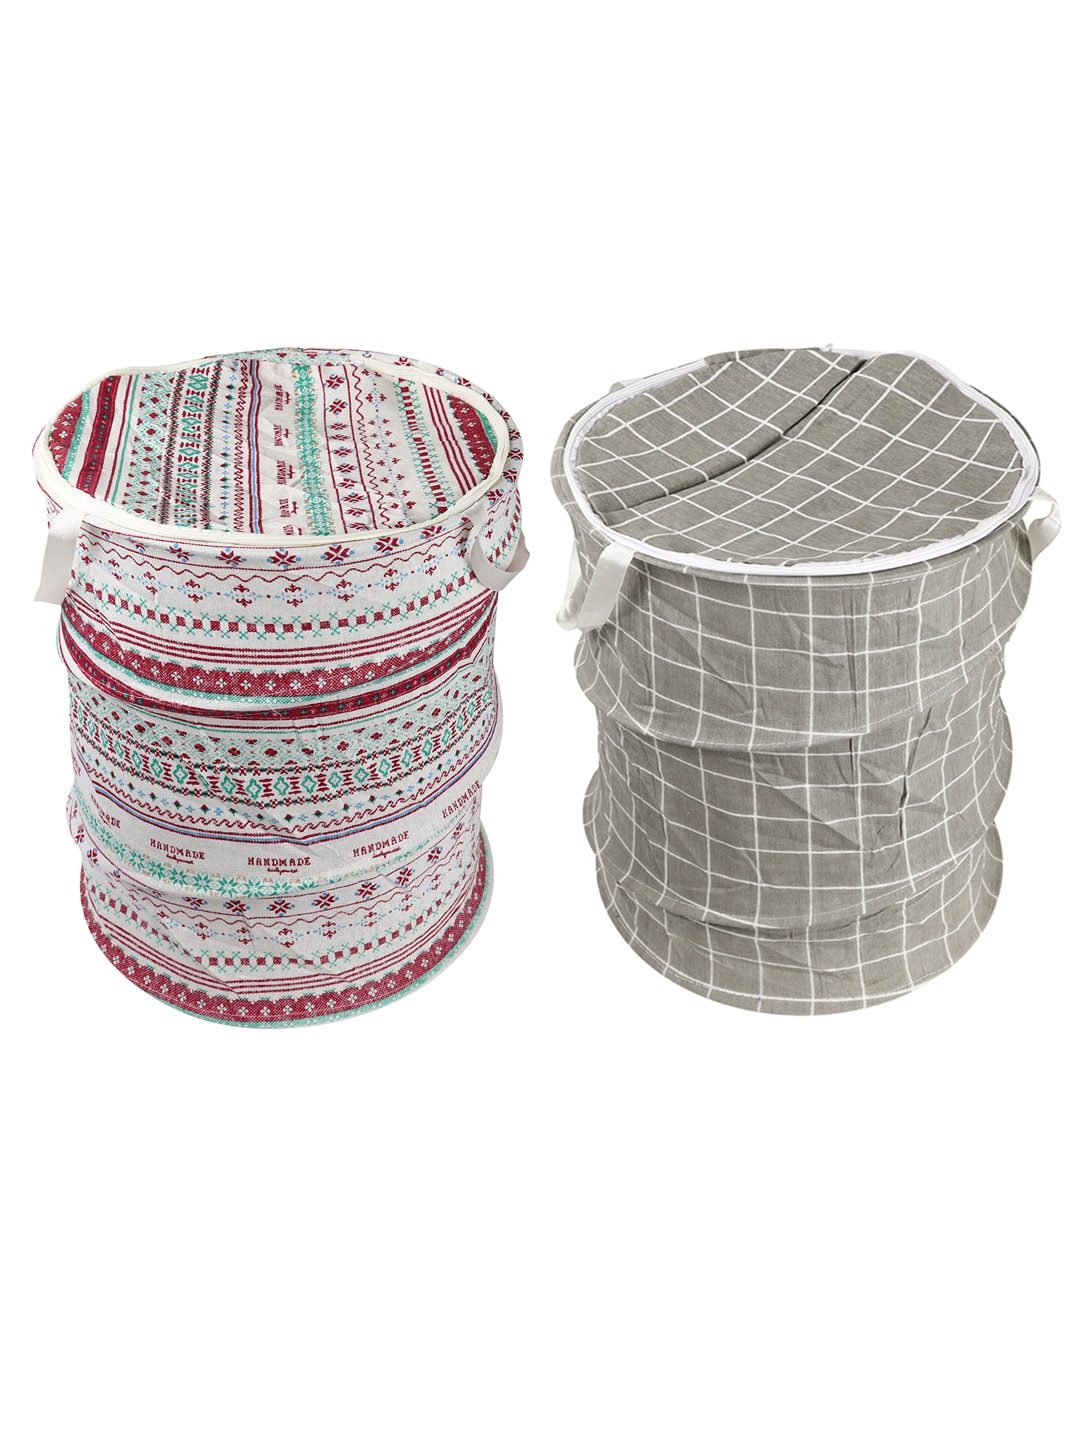 OddCroft Set Of 2 Printed Foldable Laundry Basket Price in India